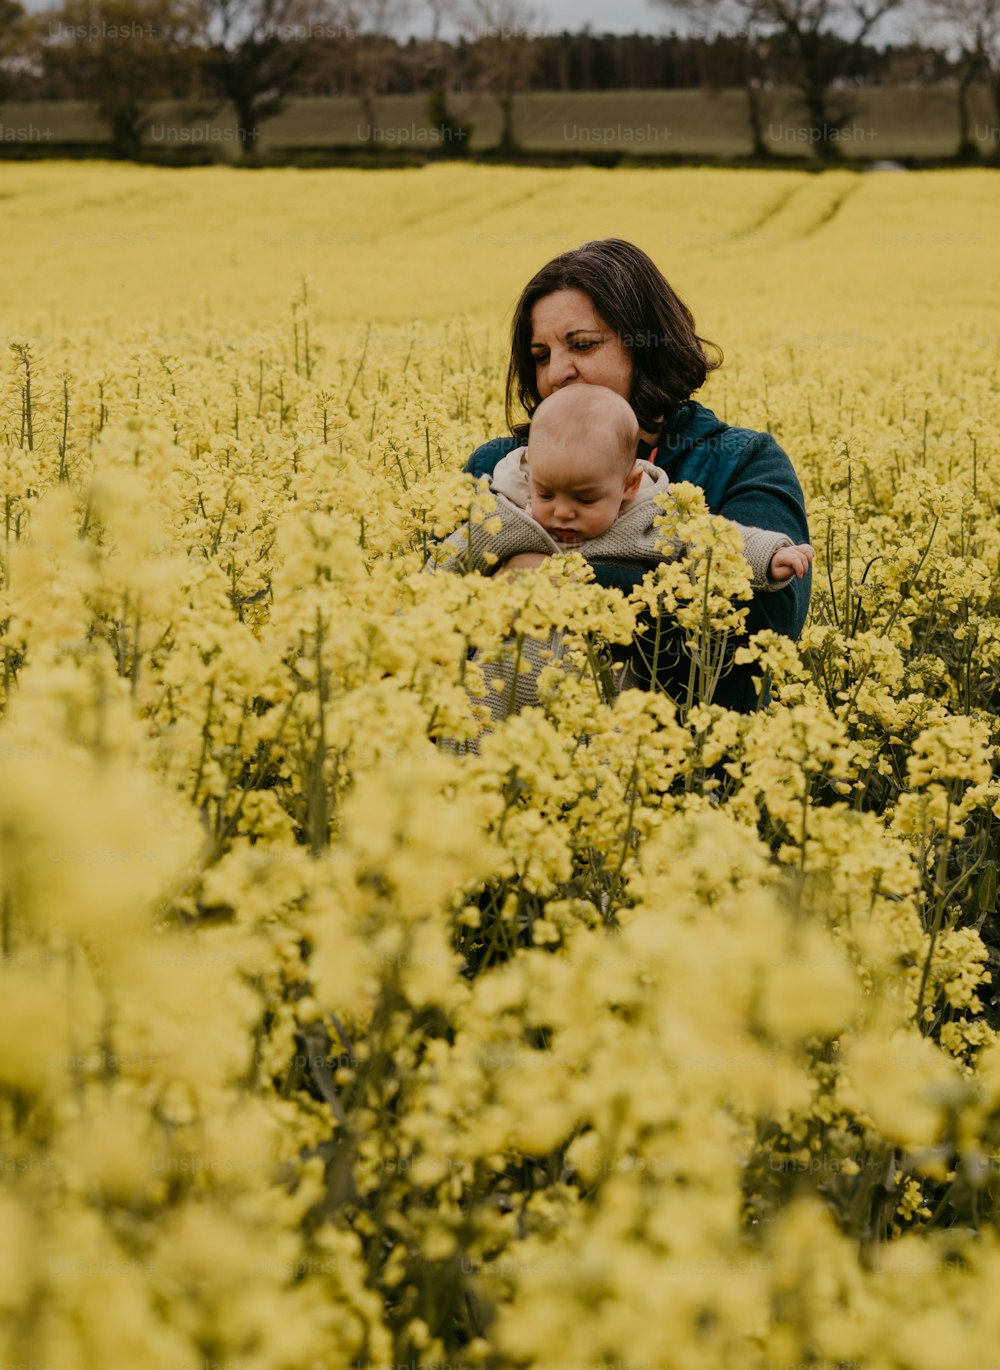 a woman holding a baby in a field of yellow flowers